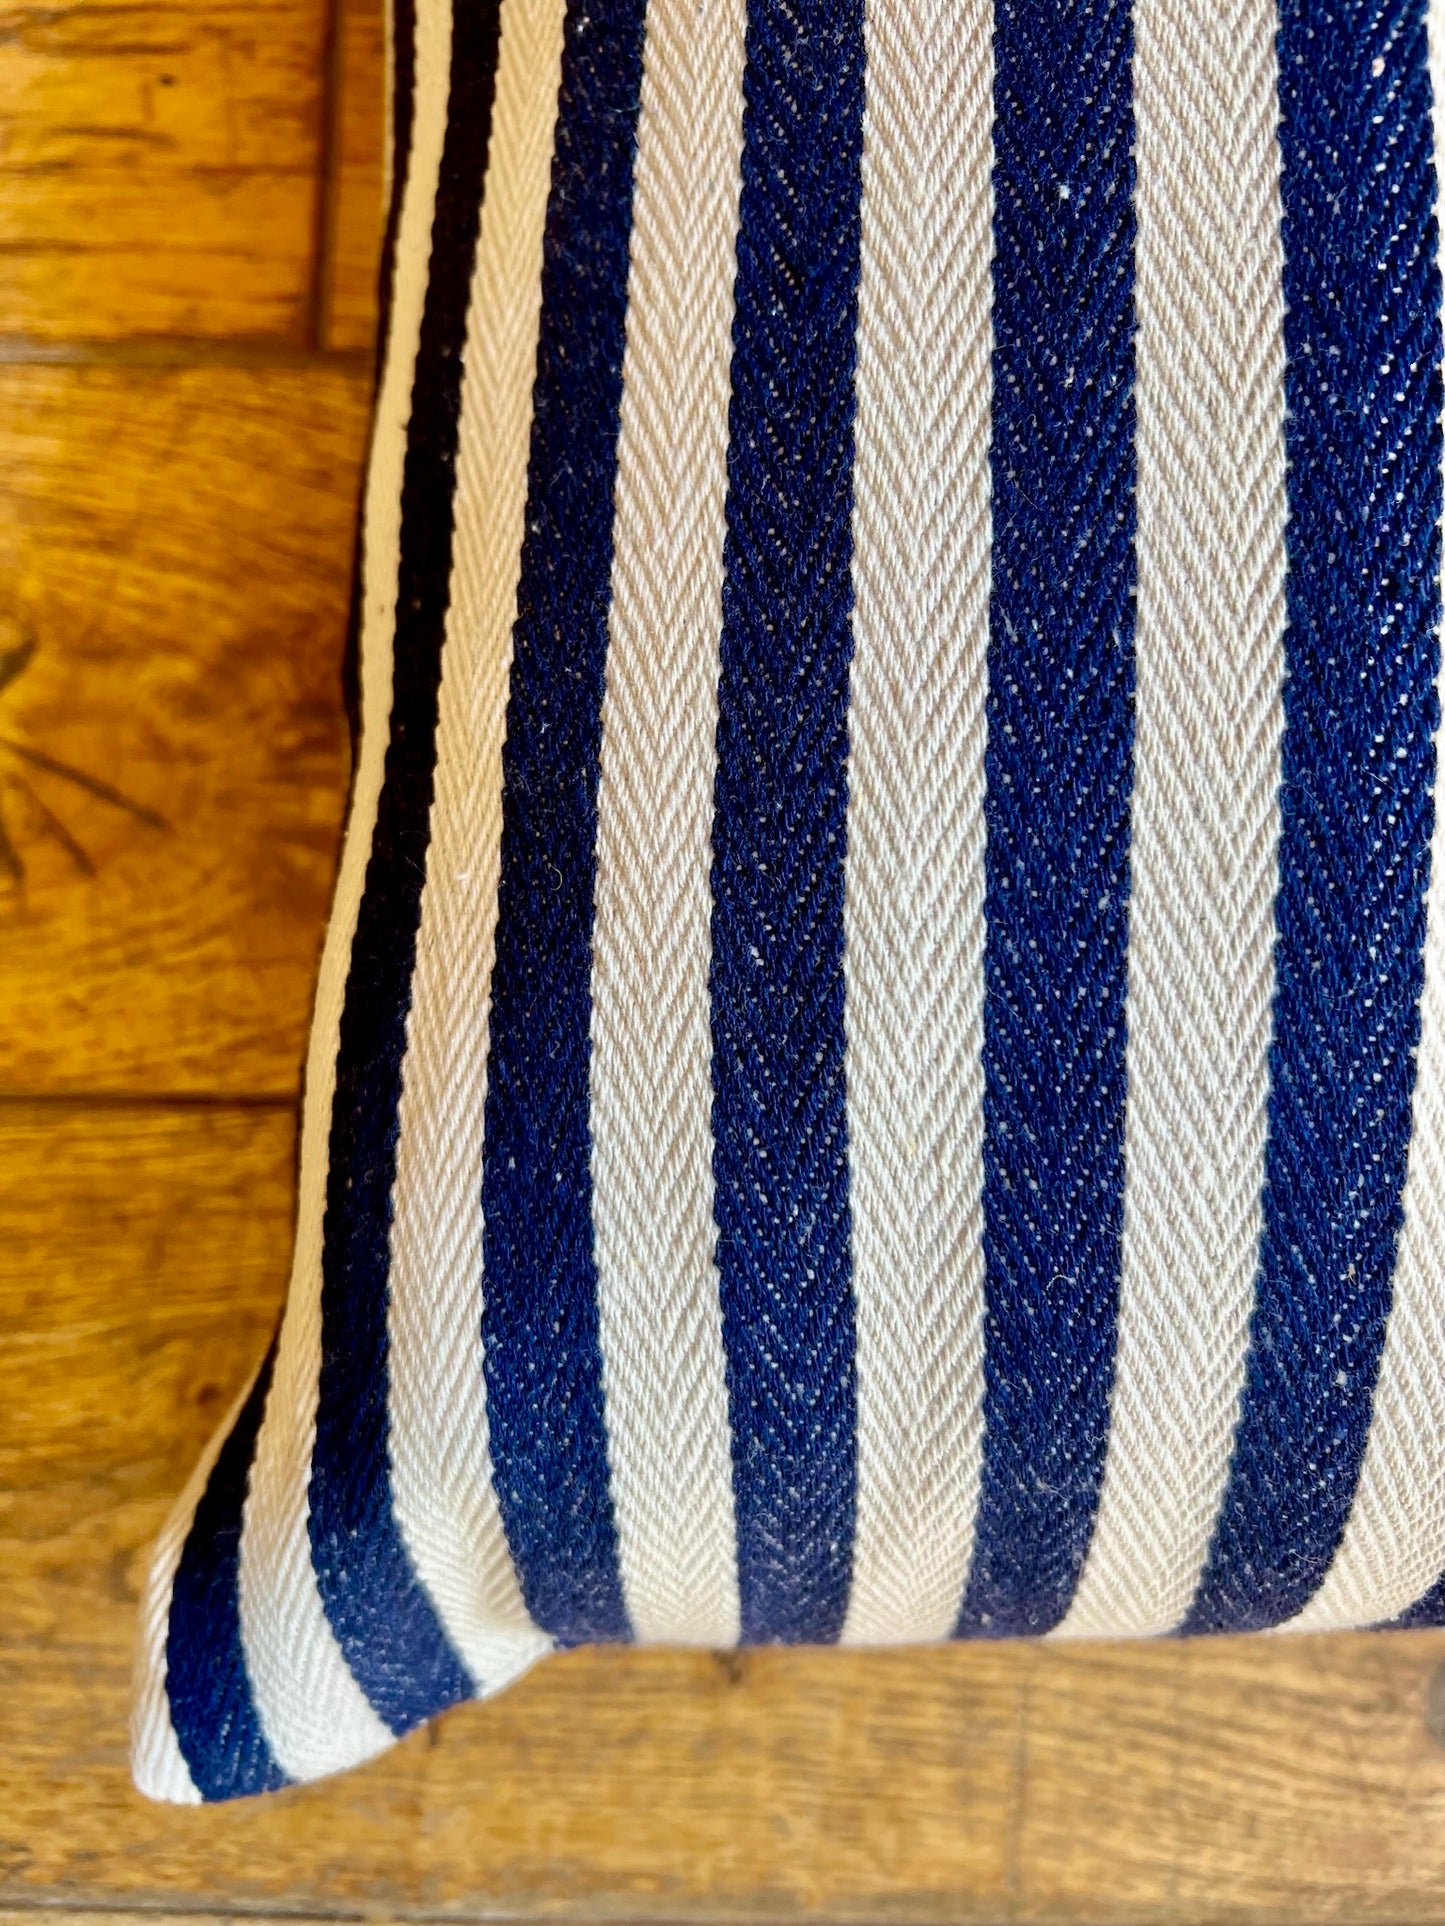 Cushion - Navy and White Stripe - Size Large | New Romantic